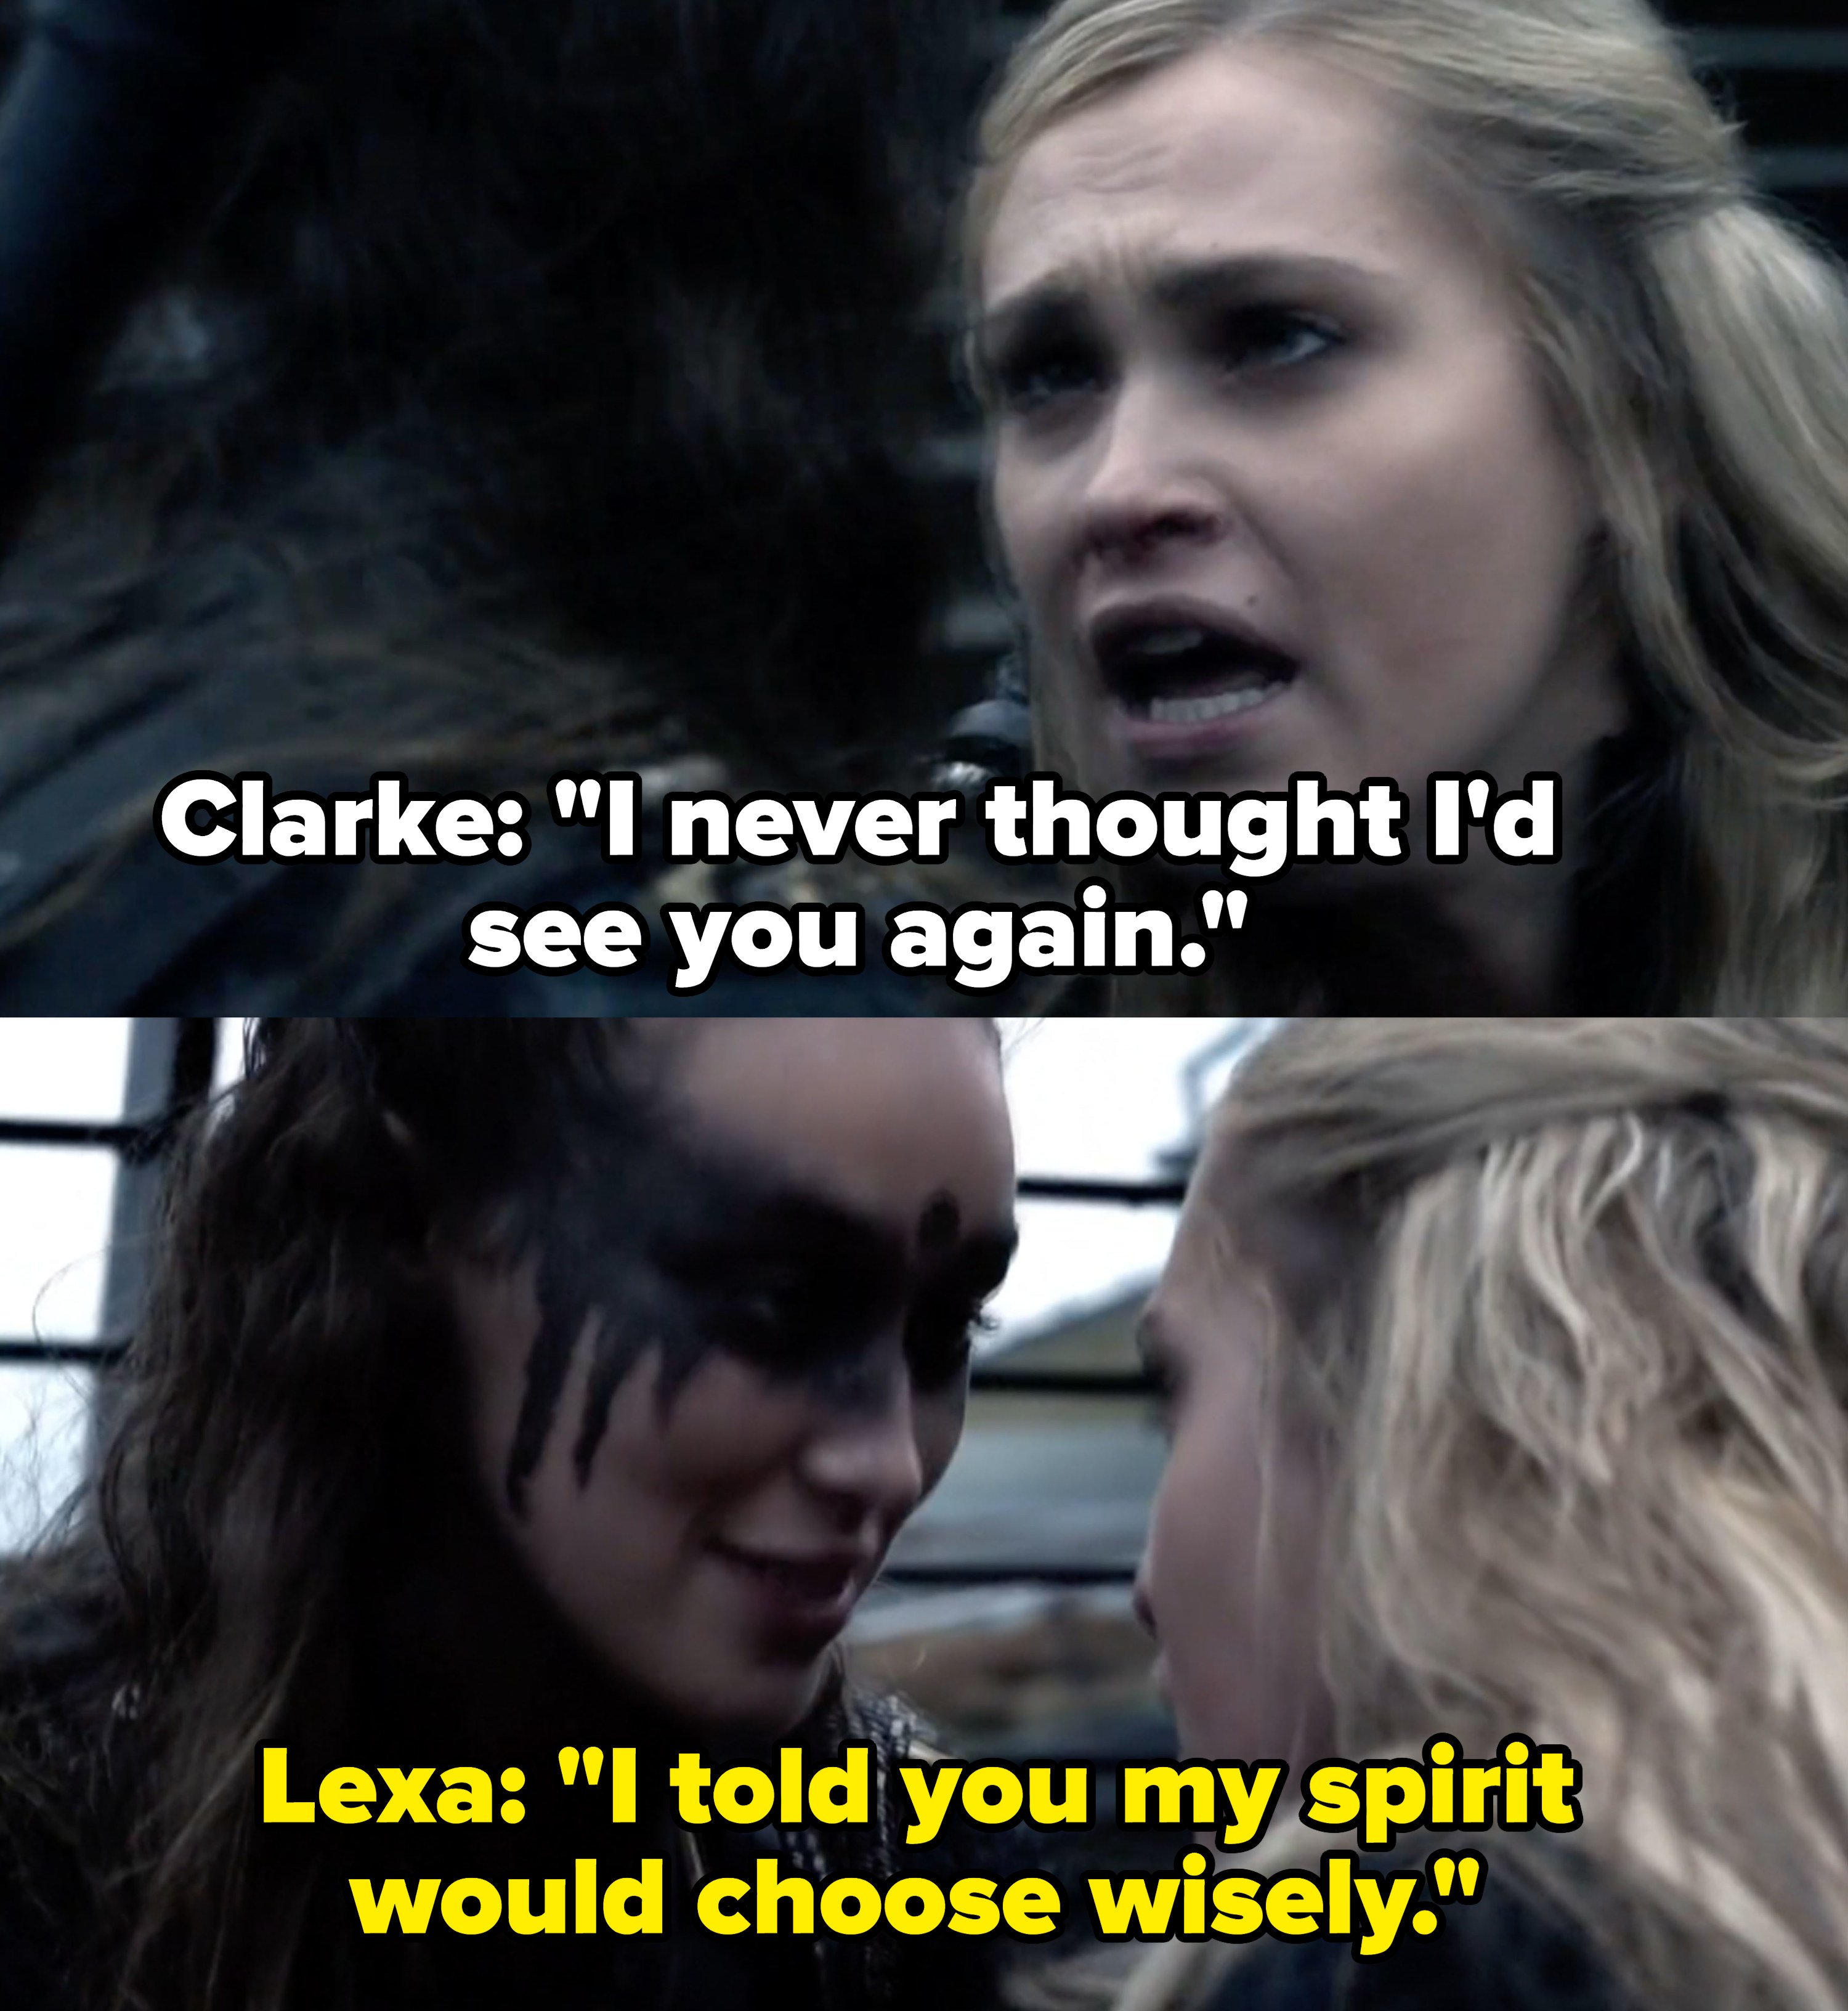 Clarke says she never thought she&#x27;d see Lexa again, Lexa responds, &quot;I told you my spirit would choose wisely&quot;